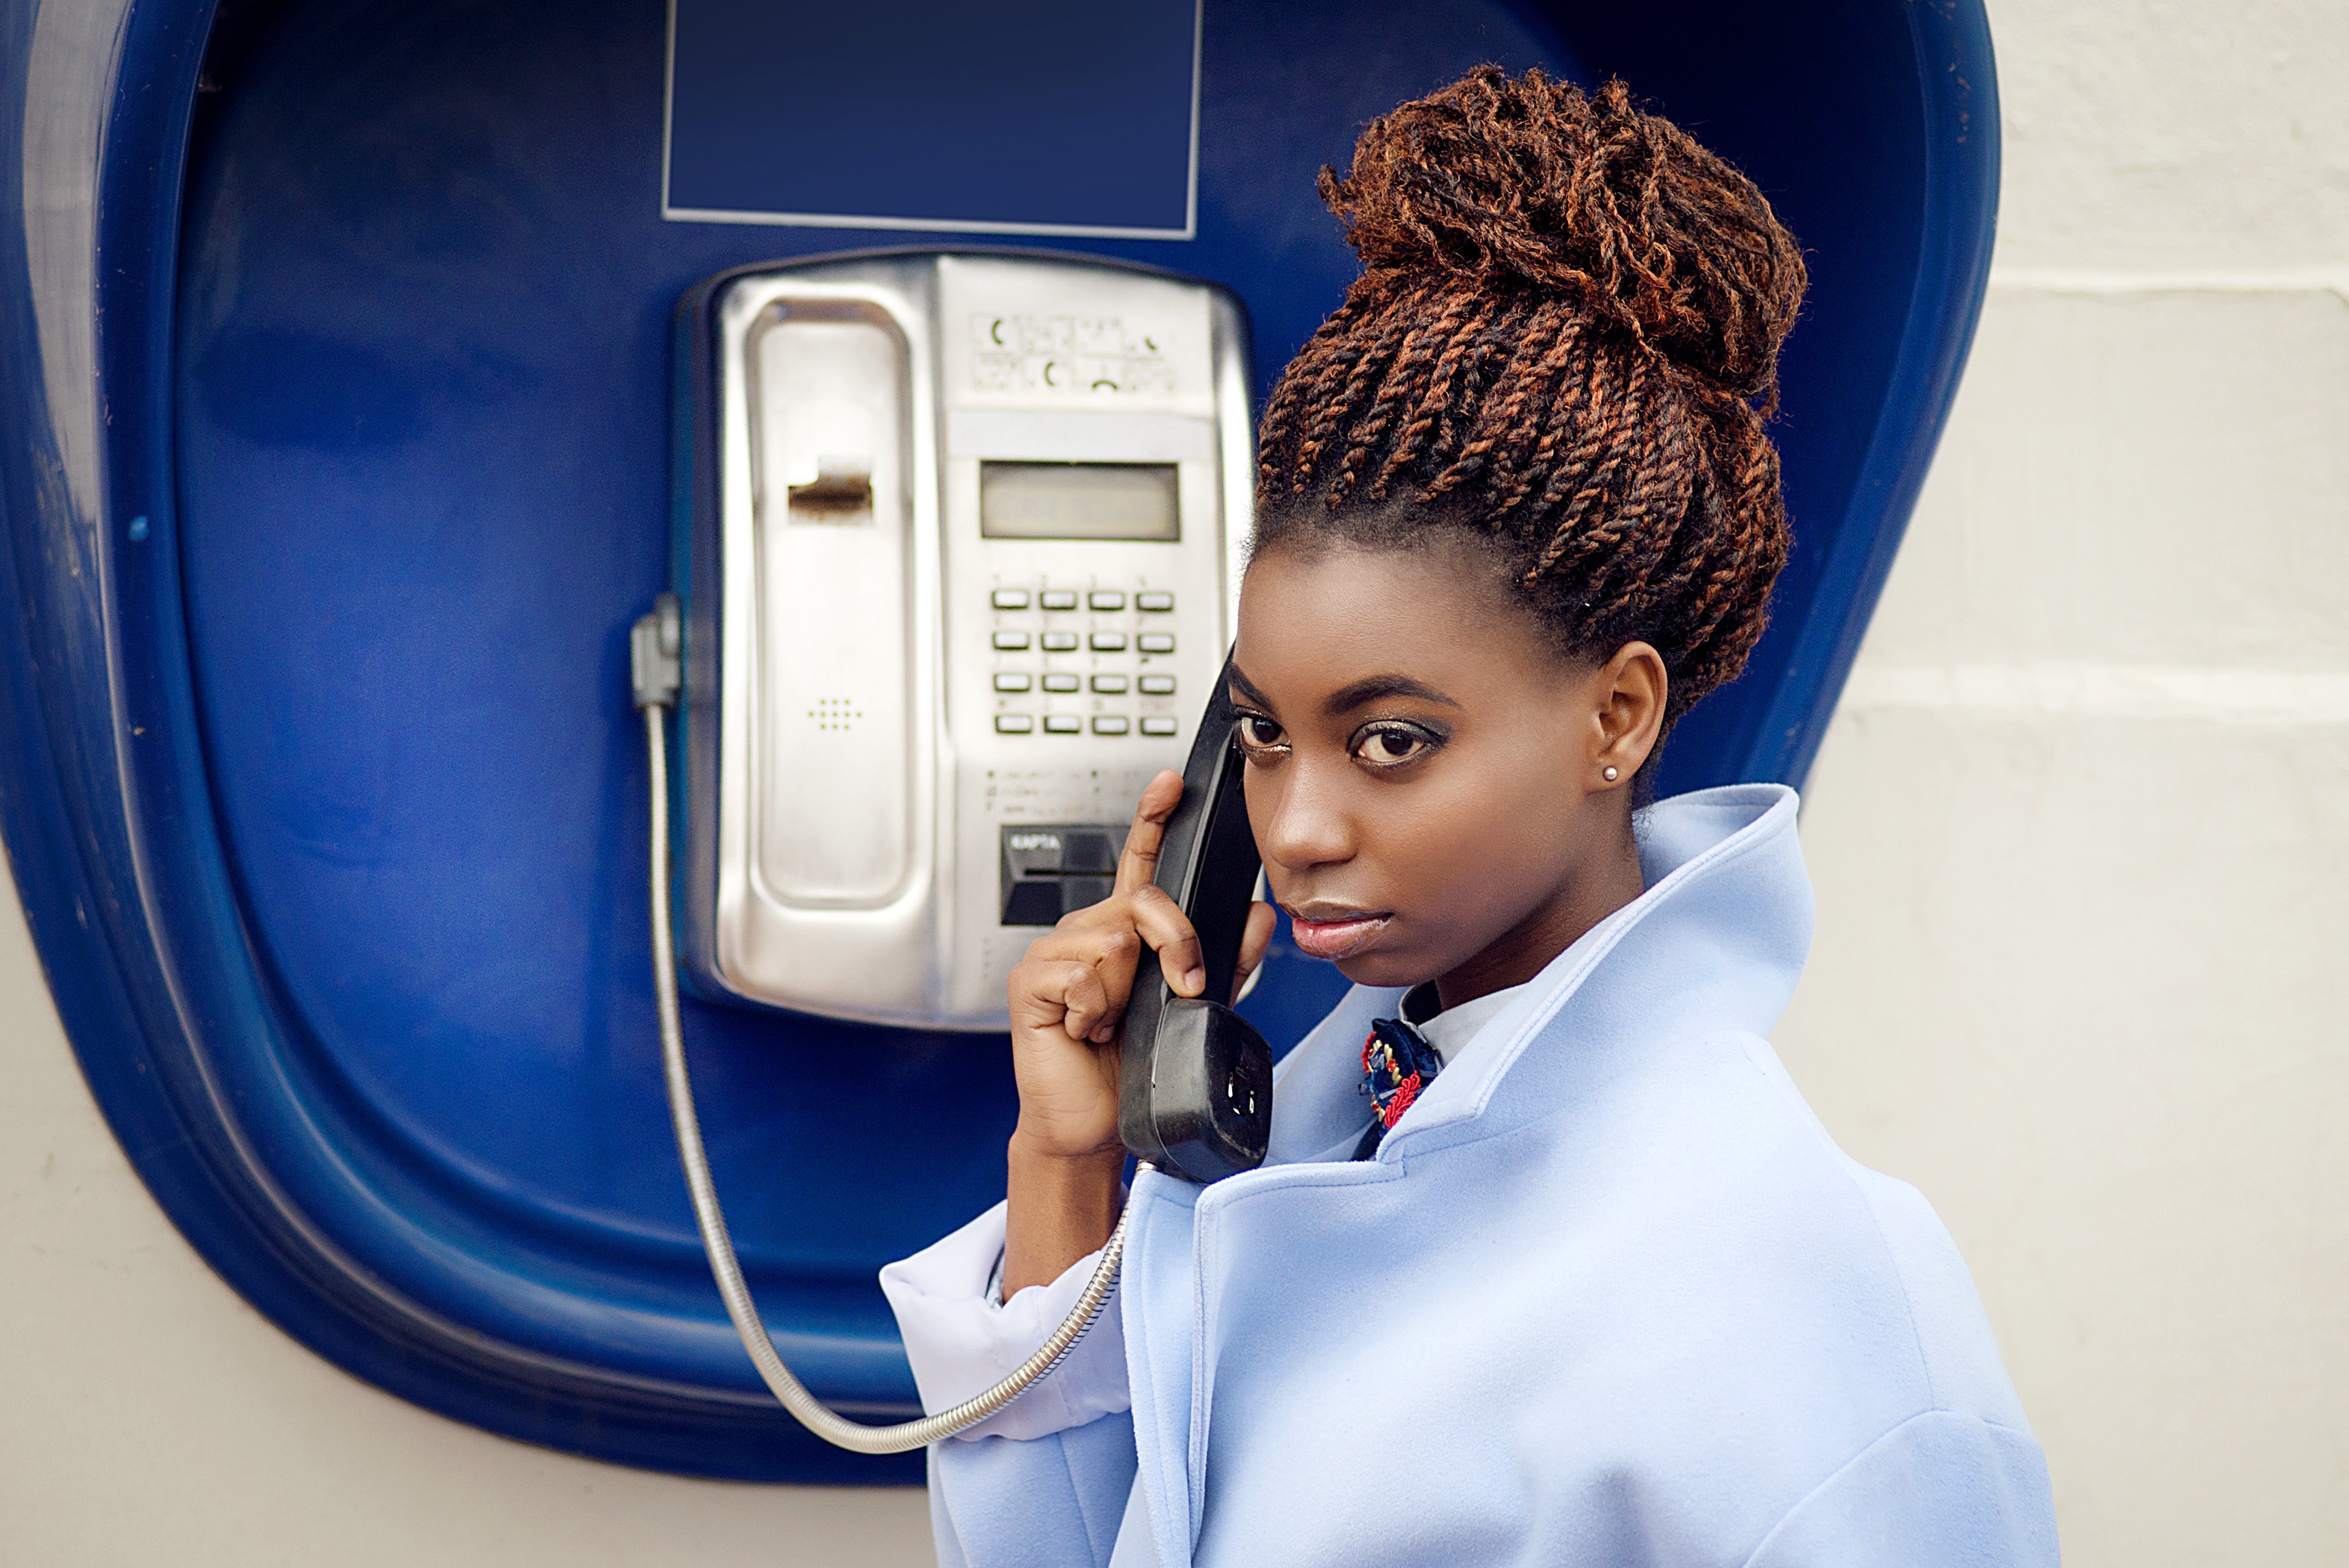 Young girl using a payphone | Photo: Shutterstock